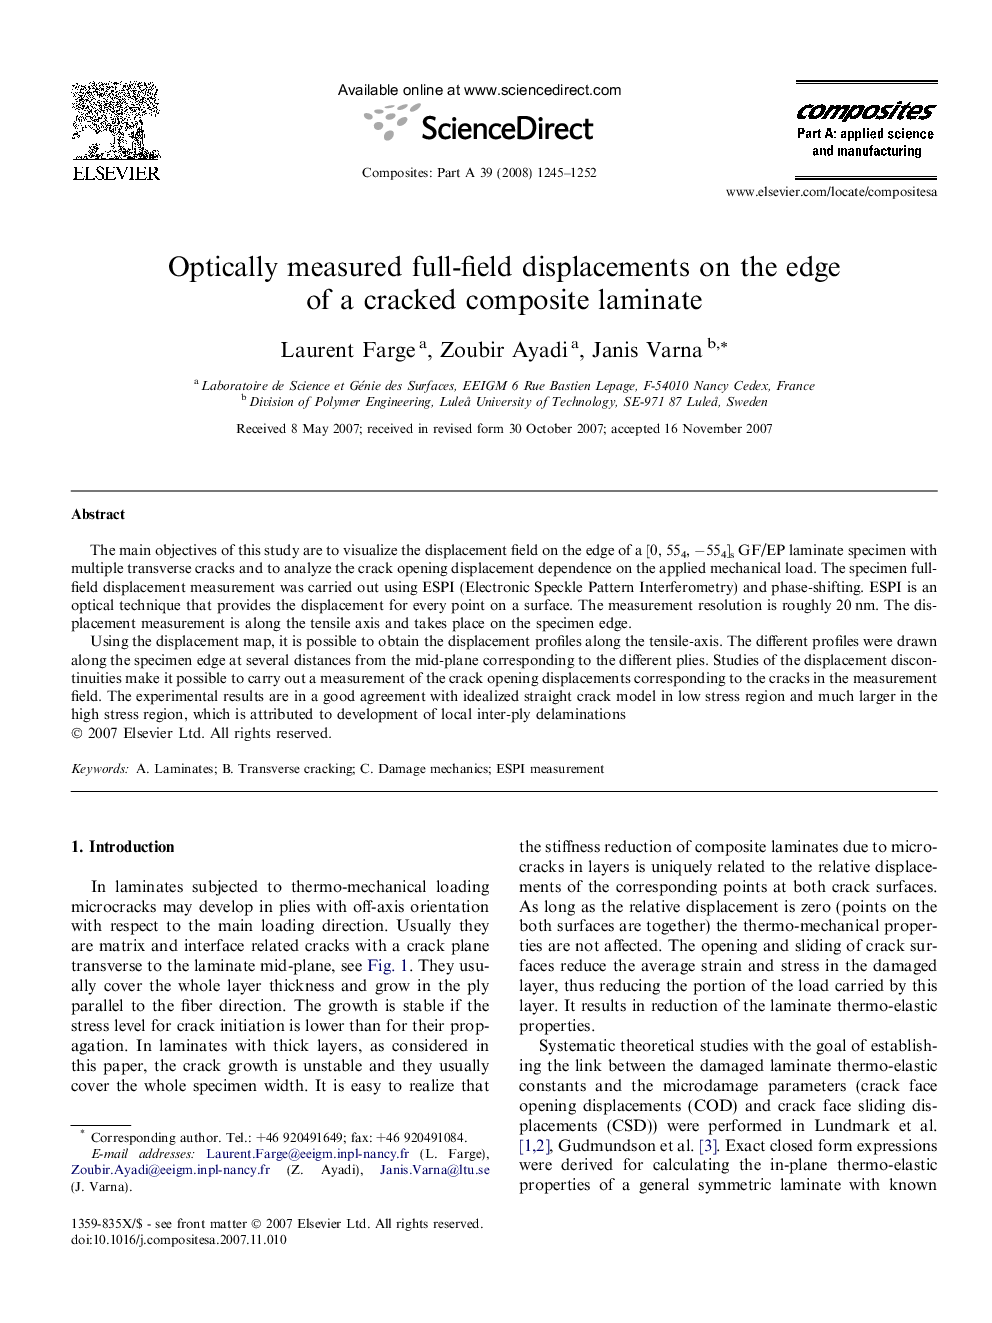 Optically measured full-field displacements on the edge of a cracked composite laminate